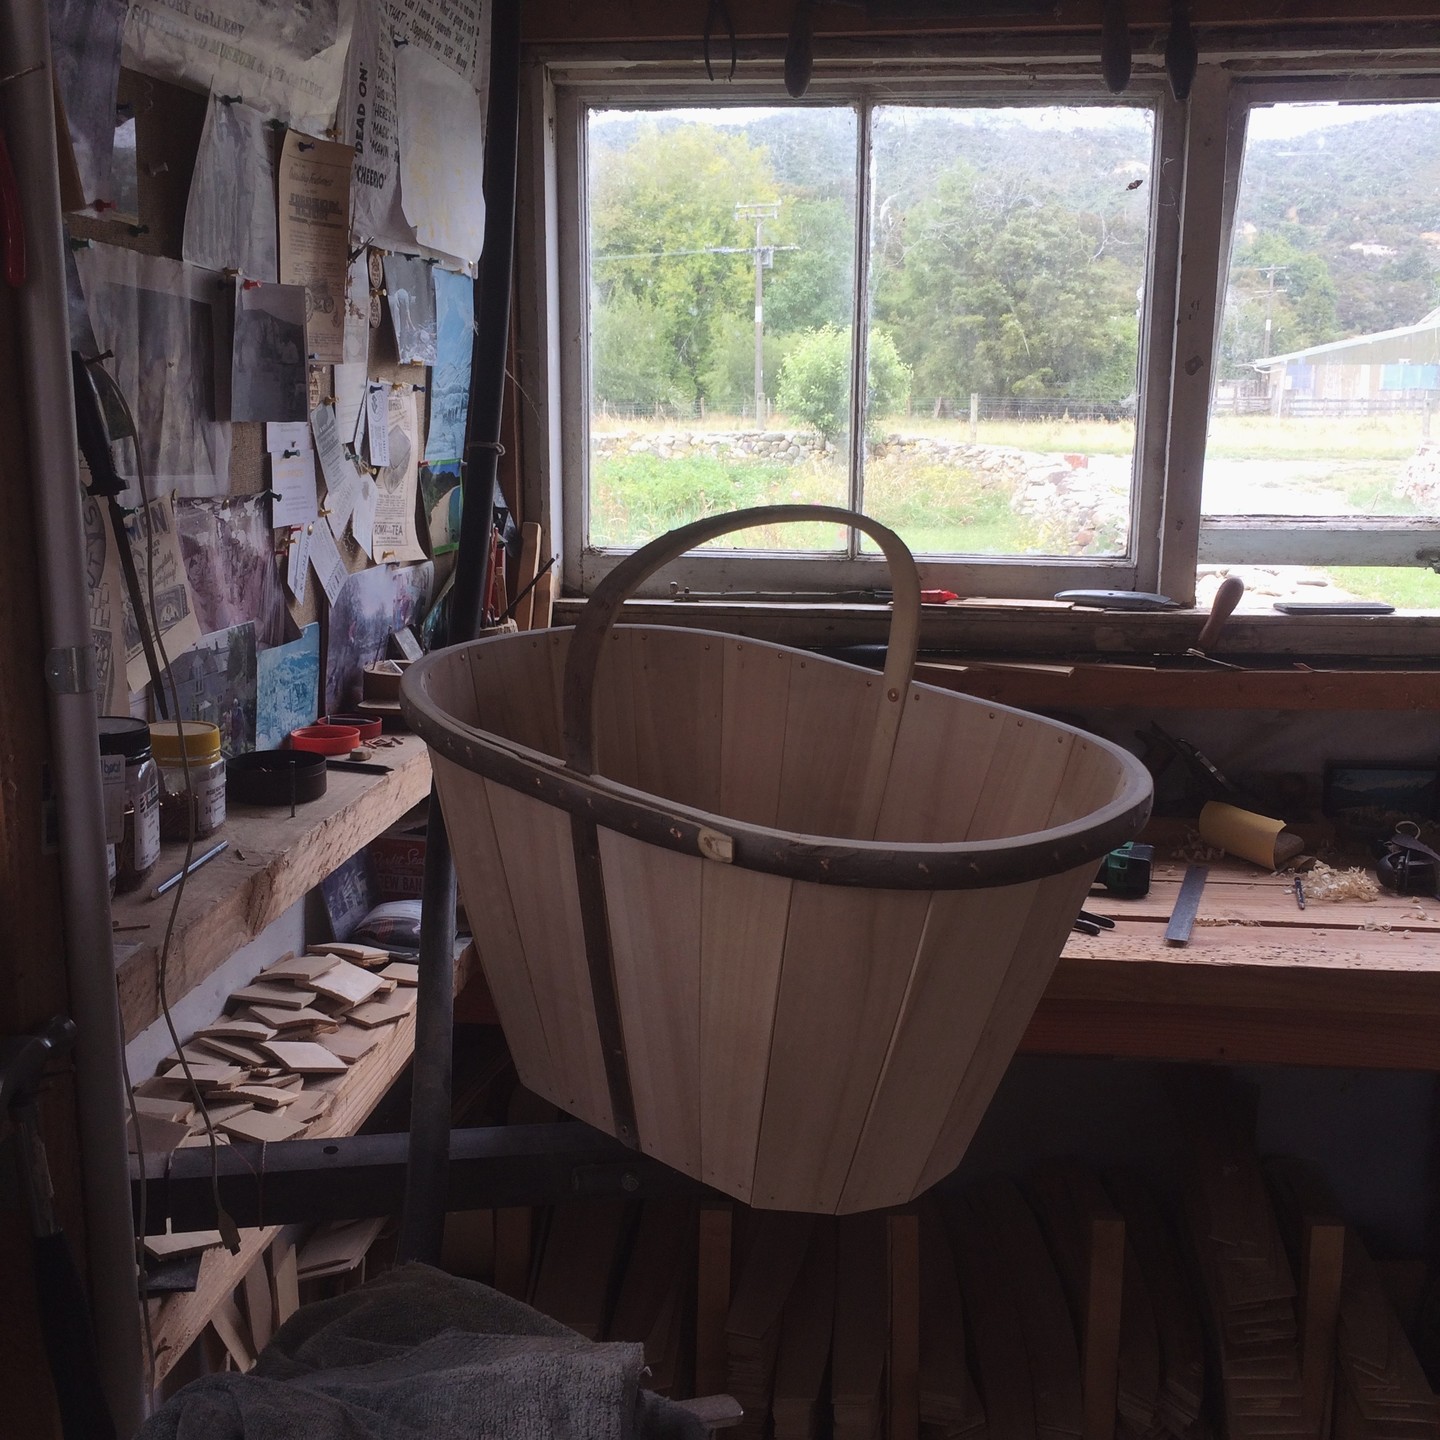 An almost complete Devon maund needing just the copper band around its base.
 
You may be able to see the jig that allows Tony to rotate the maund as he is working on it. Carefully prepared trug boards are stacked by shape under the bench.

#trugmaking #trugworkshop #hazel #willow #aspenpoplar #sustainablyharvested #handmadeinnz #devonmaund #splintbasket 
 #handmadegifts #handmadeingoldenbay #supportlocalnz #buynzmade #shoplocalnz #sustainablysourcedtimber #locallysourced #sustainablymade #chemicalfree #untreatedwood #goldenbay #goldenbaynz #anatoki